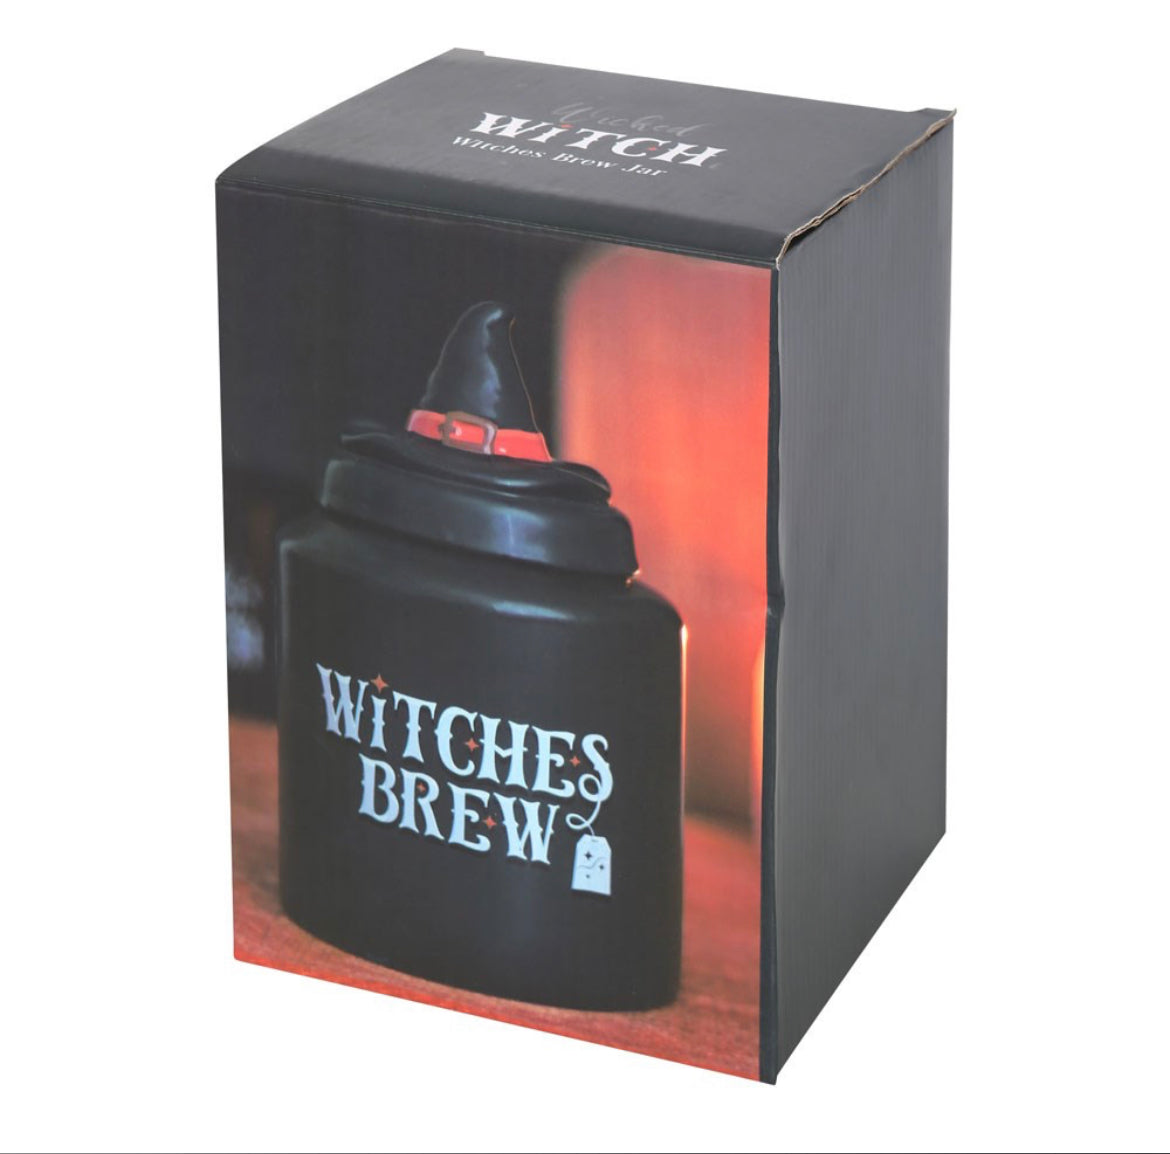 Witches Brew Ceramic Tea Canister - Wicked Witcheries